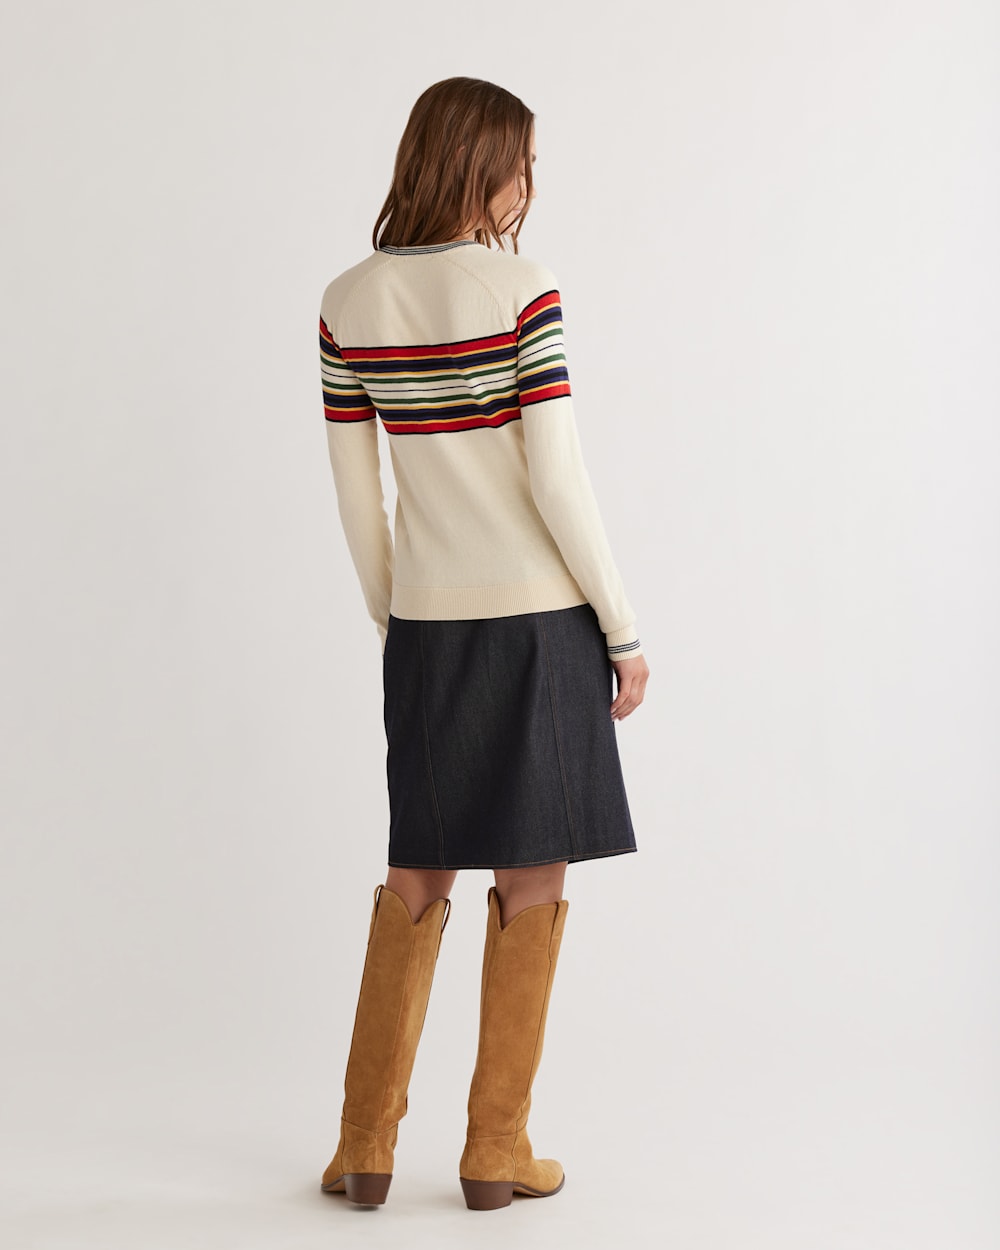 ALTERNATE VIEW OF WOMEN'S COTTON/CASHMERE STRIPED PULLOVER IN CREAM MULTI image number 3